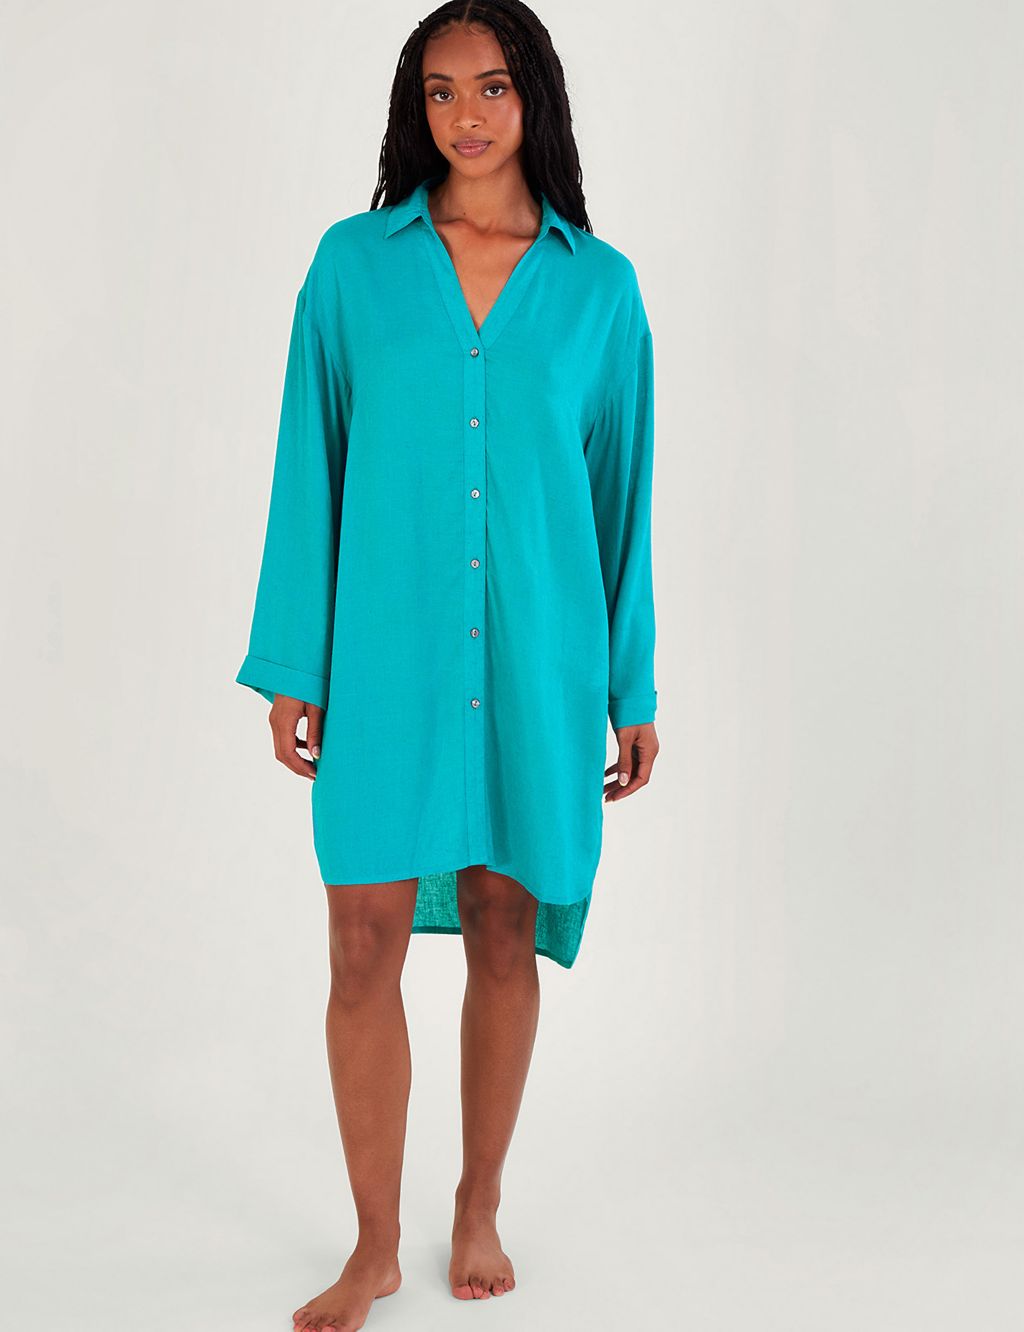 Oversized Beach Cover Up Shirt with Linen